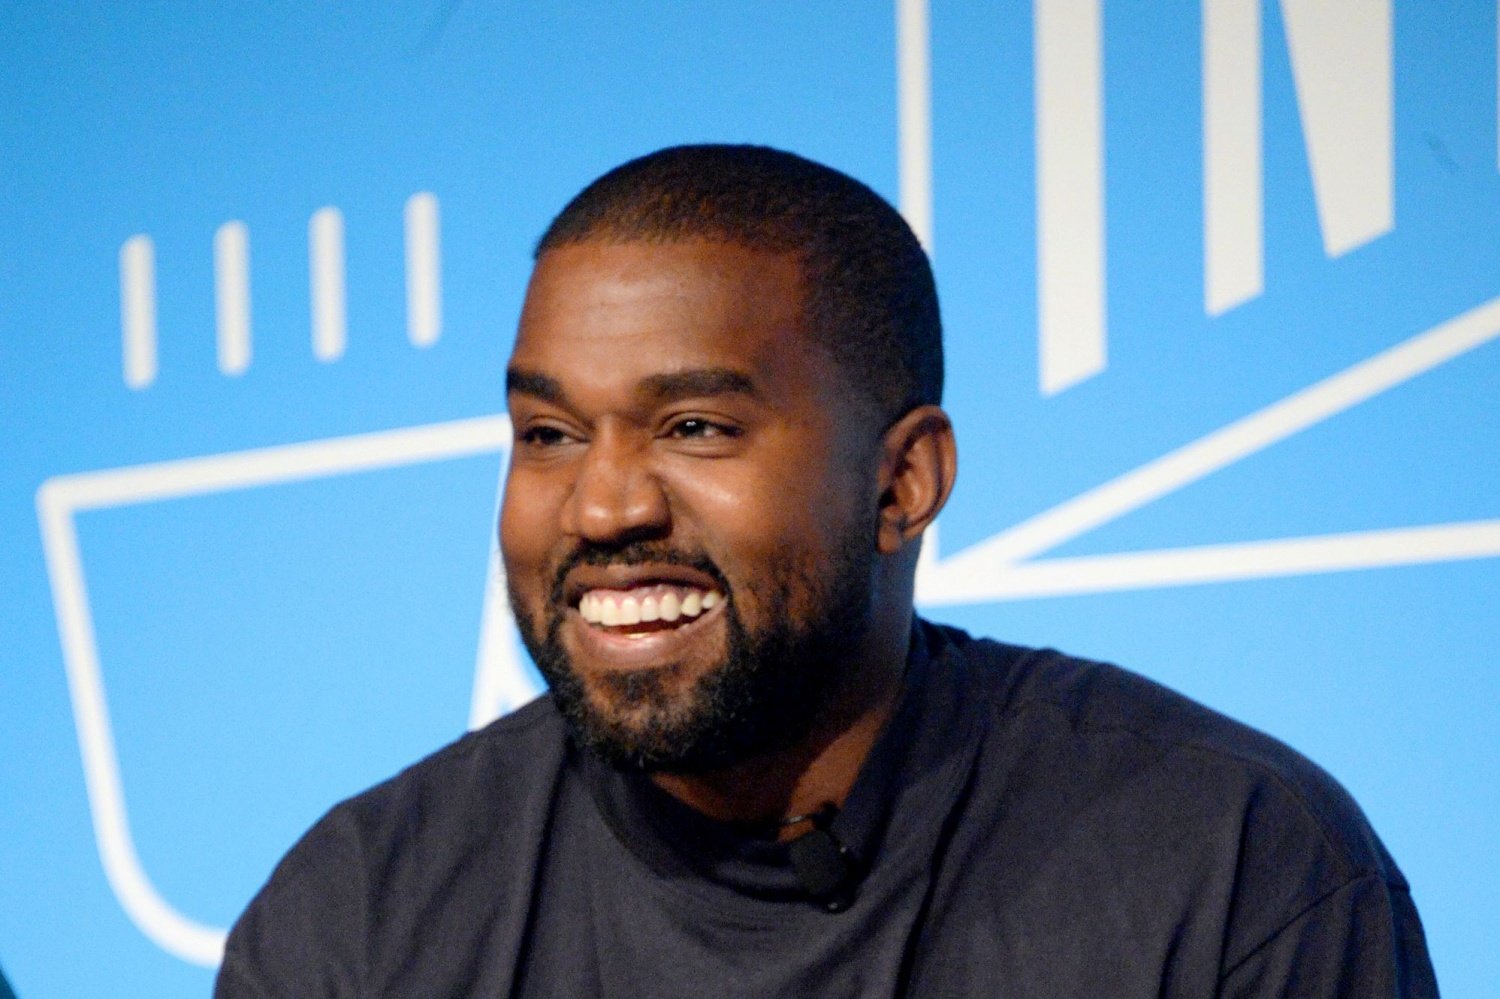 Kanye West Is Over Record Labels Ignore the Rapper Despite His Completed Latest Album